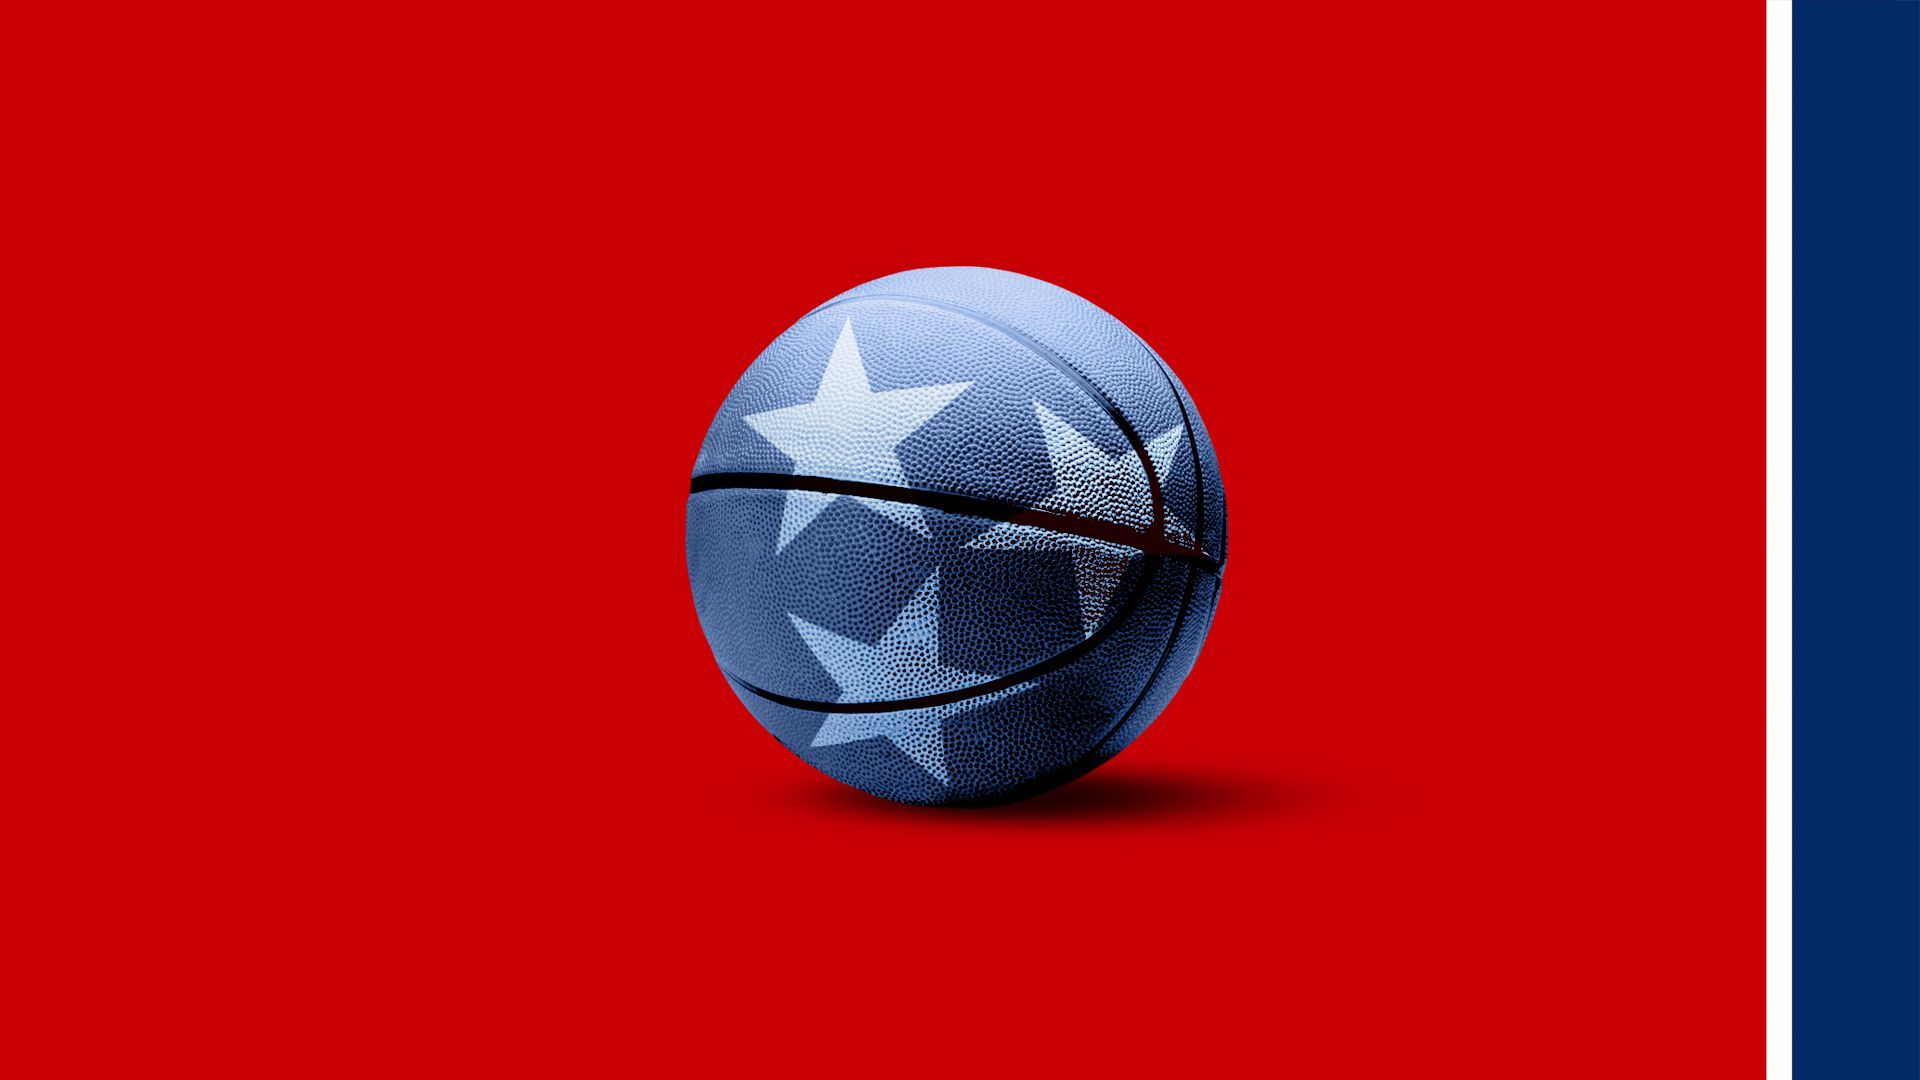 Illustration of the TN flag with a basketball at the center.